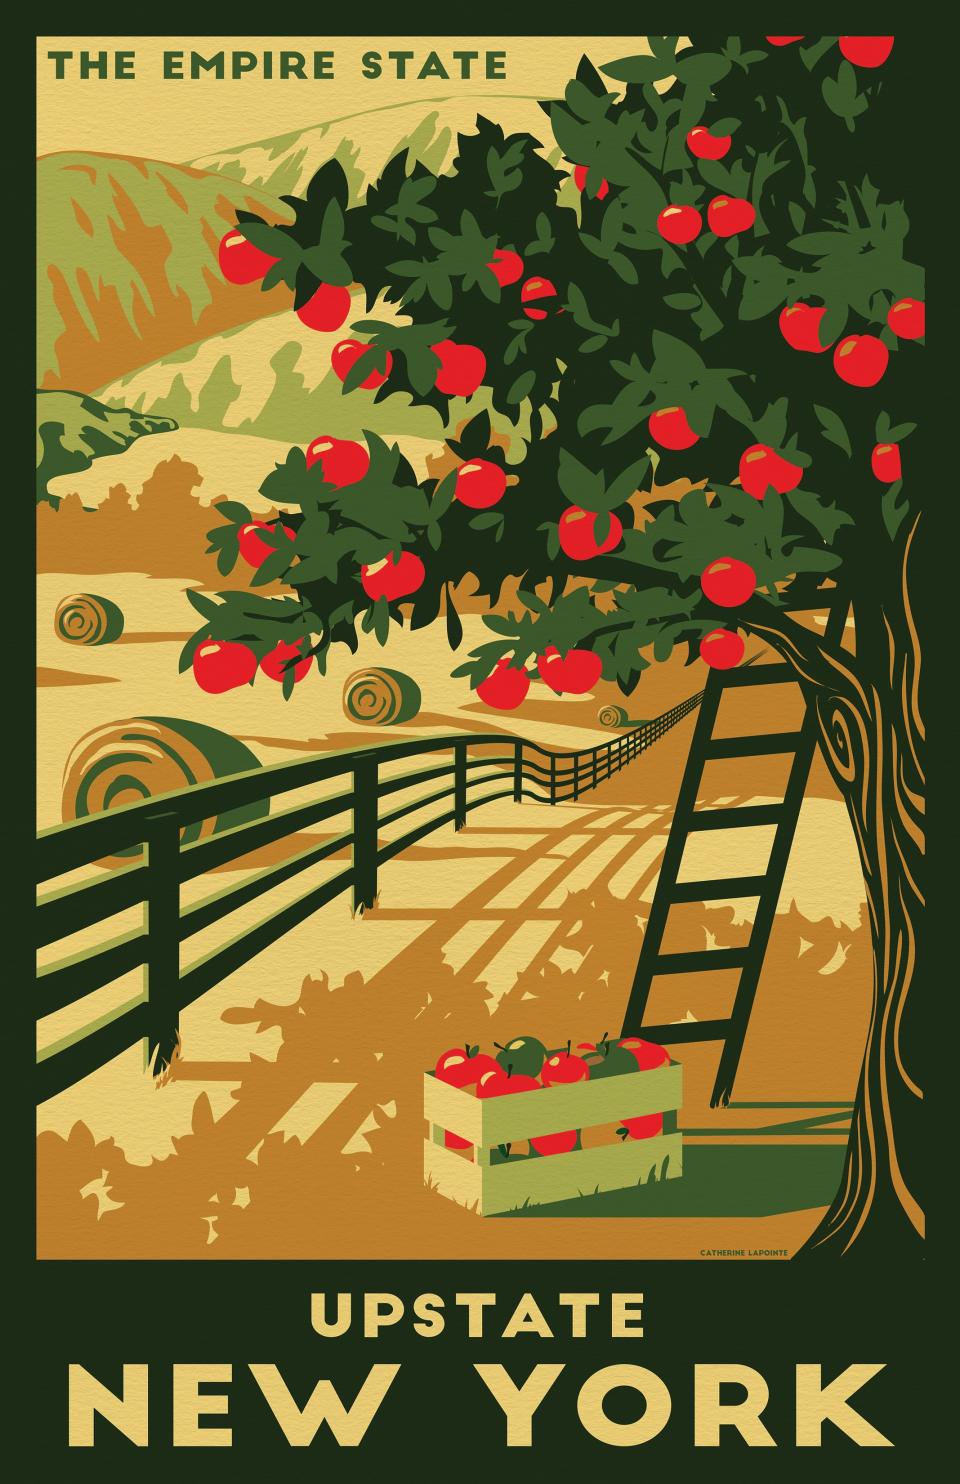 A travel poster of upstate New York by Catherine LaPointe Vollmer.